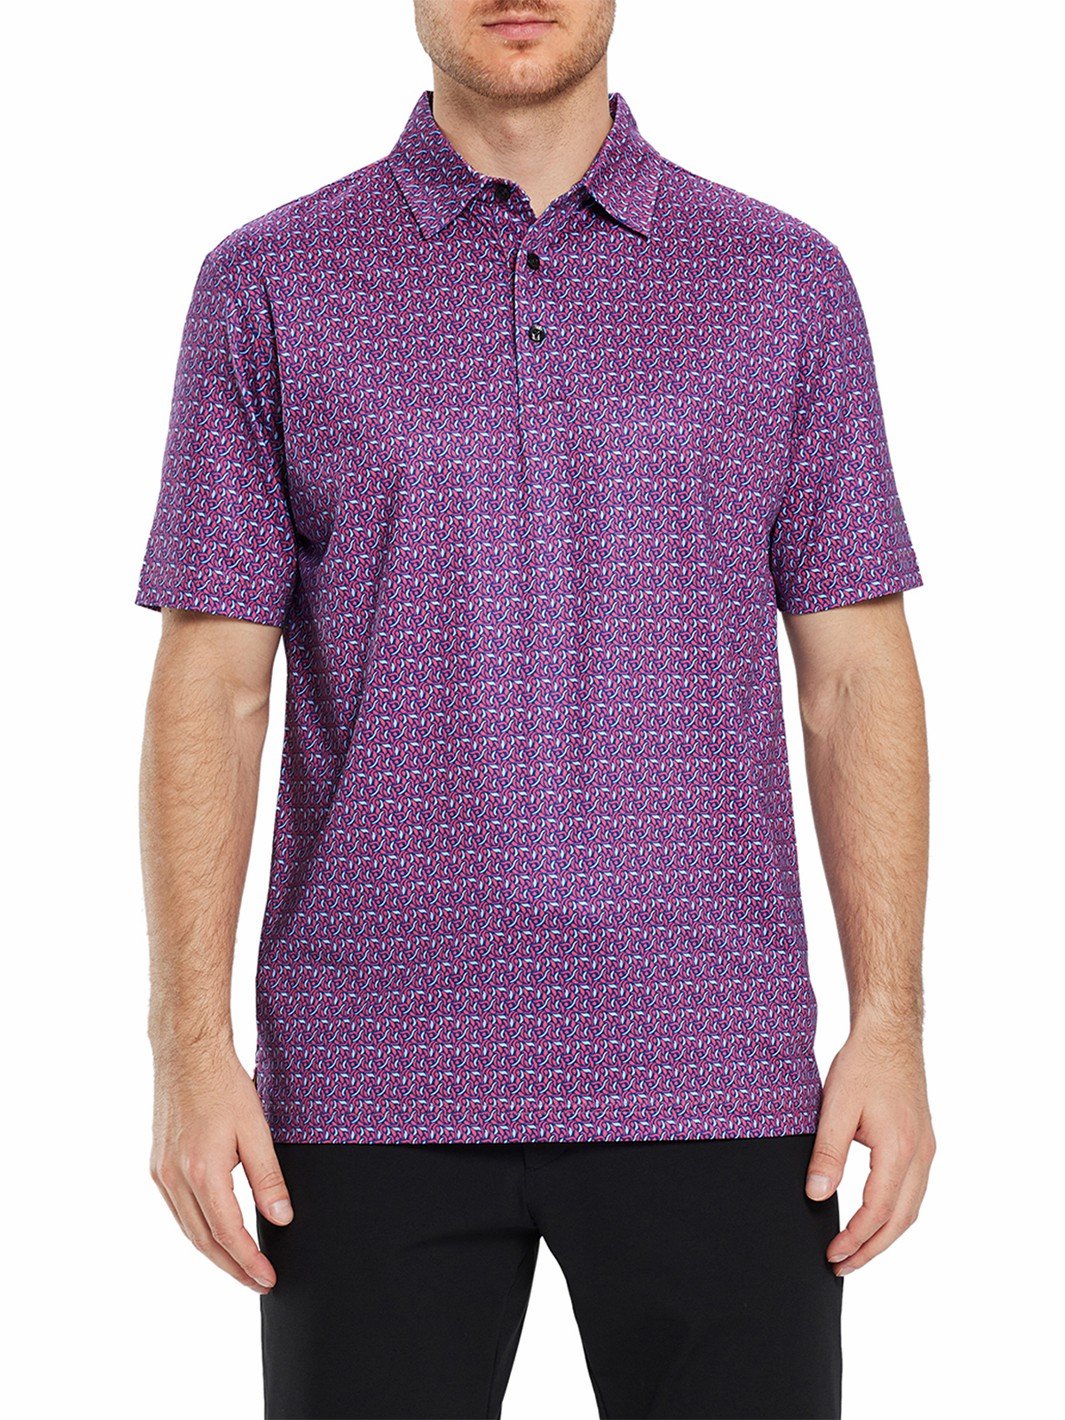 Men's Printed Golf Polo Shirts Dry Fit Moisture Wicking Lightweight Quick Dry Polo Shirt